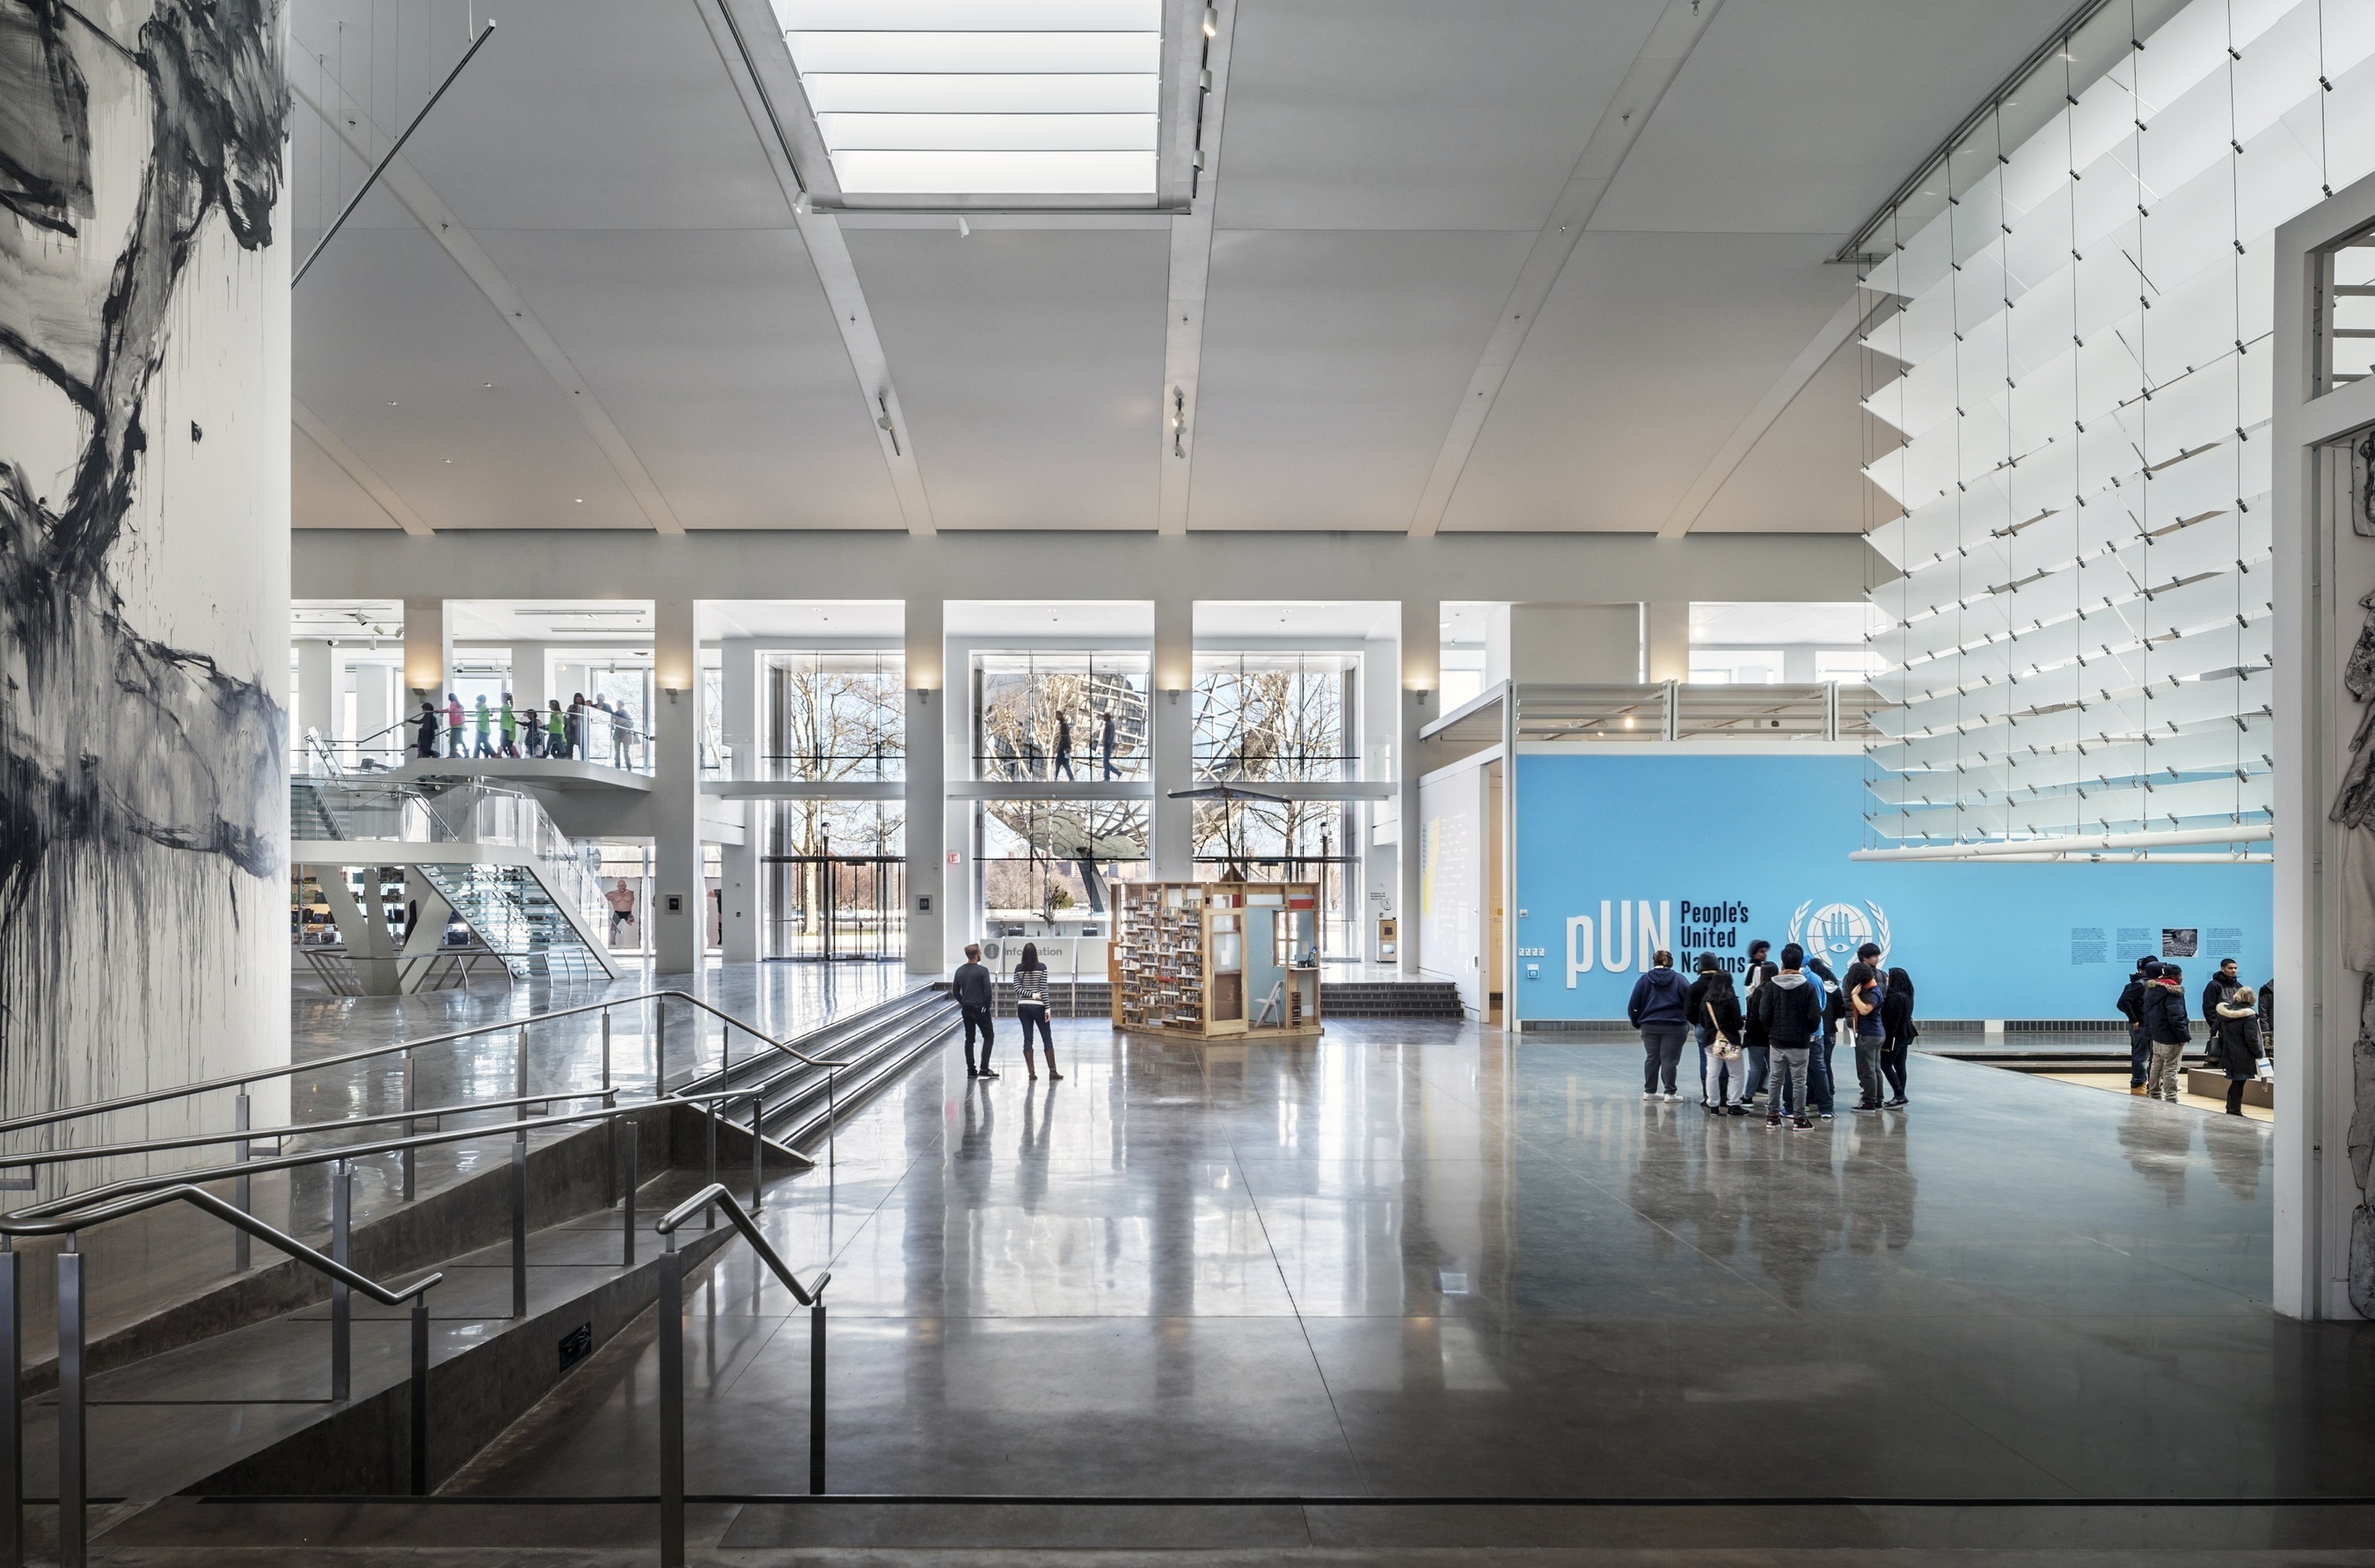 Main floor at Queens Museum with its glass staircase and stunning view of the Unisphere. (PRNewsFoto/Amerivents)